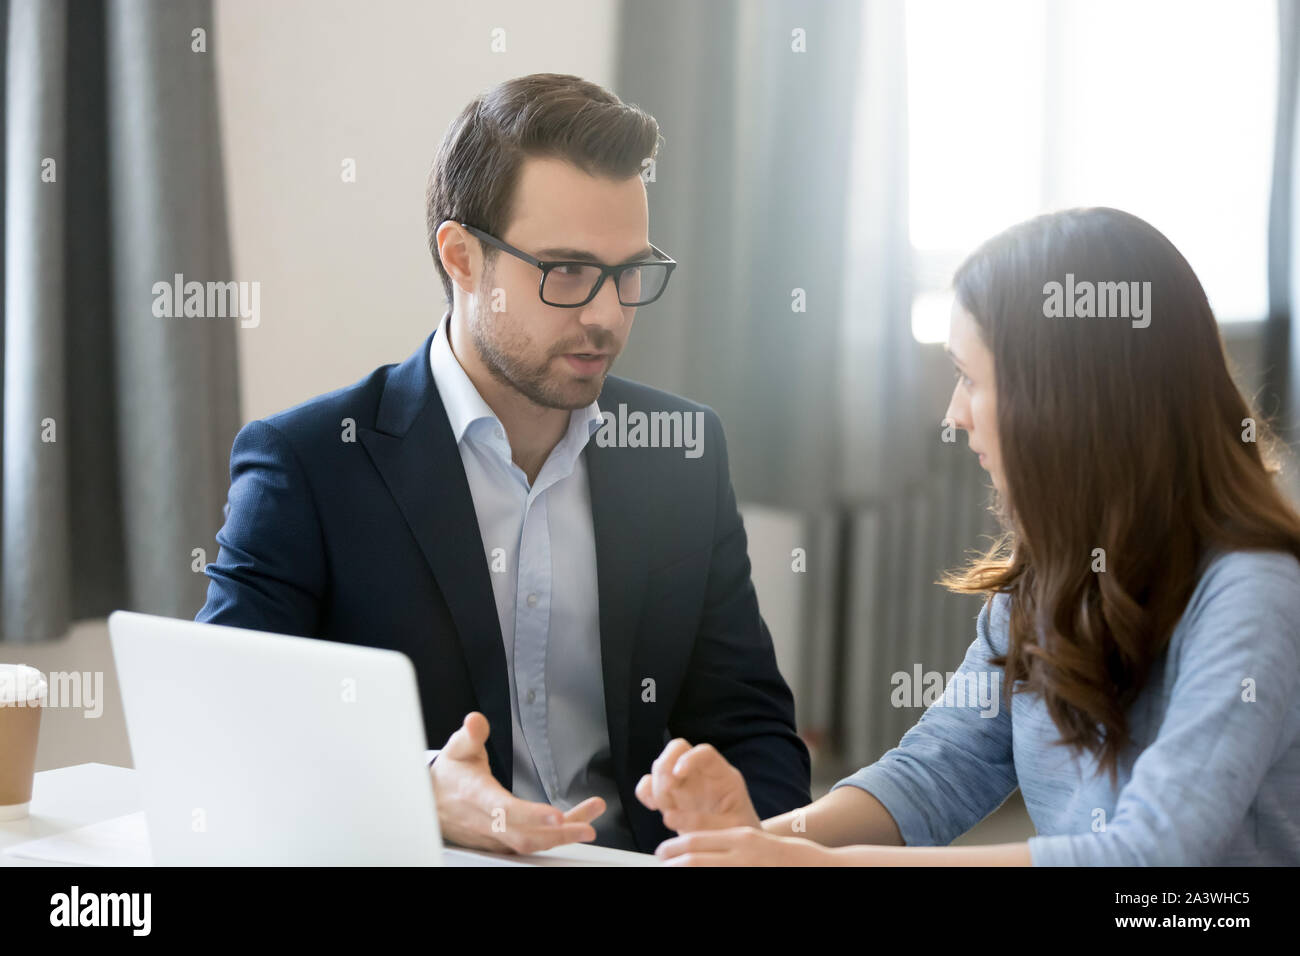 Company members woman man sitting at desk discussing new project Stock Photo